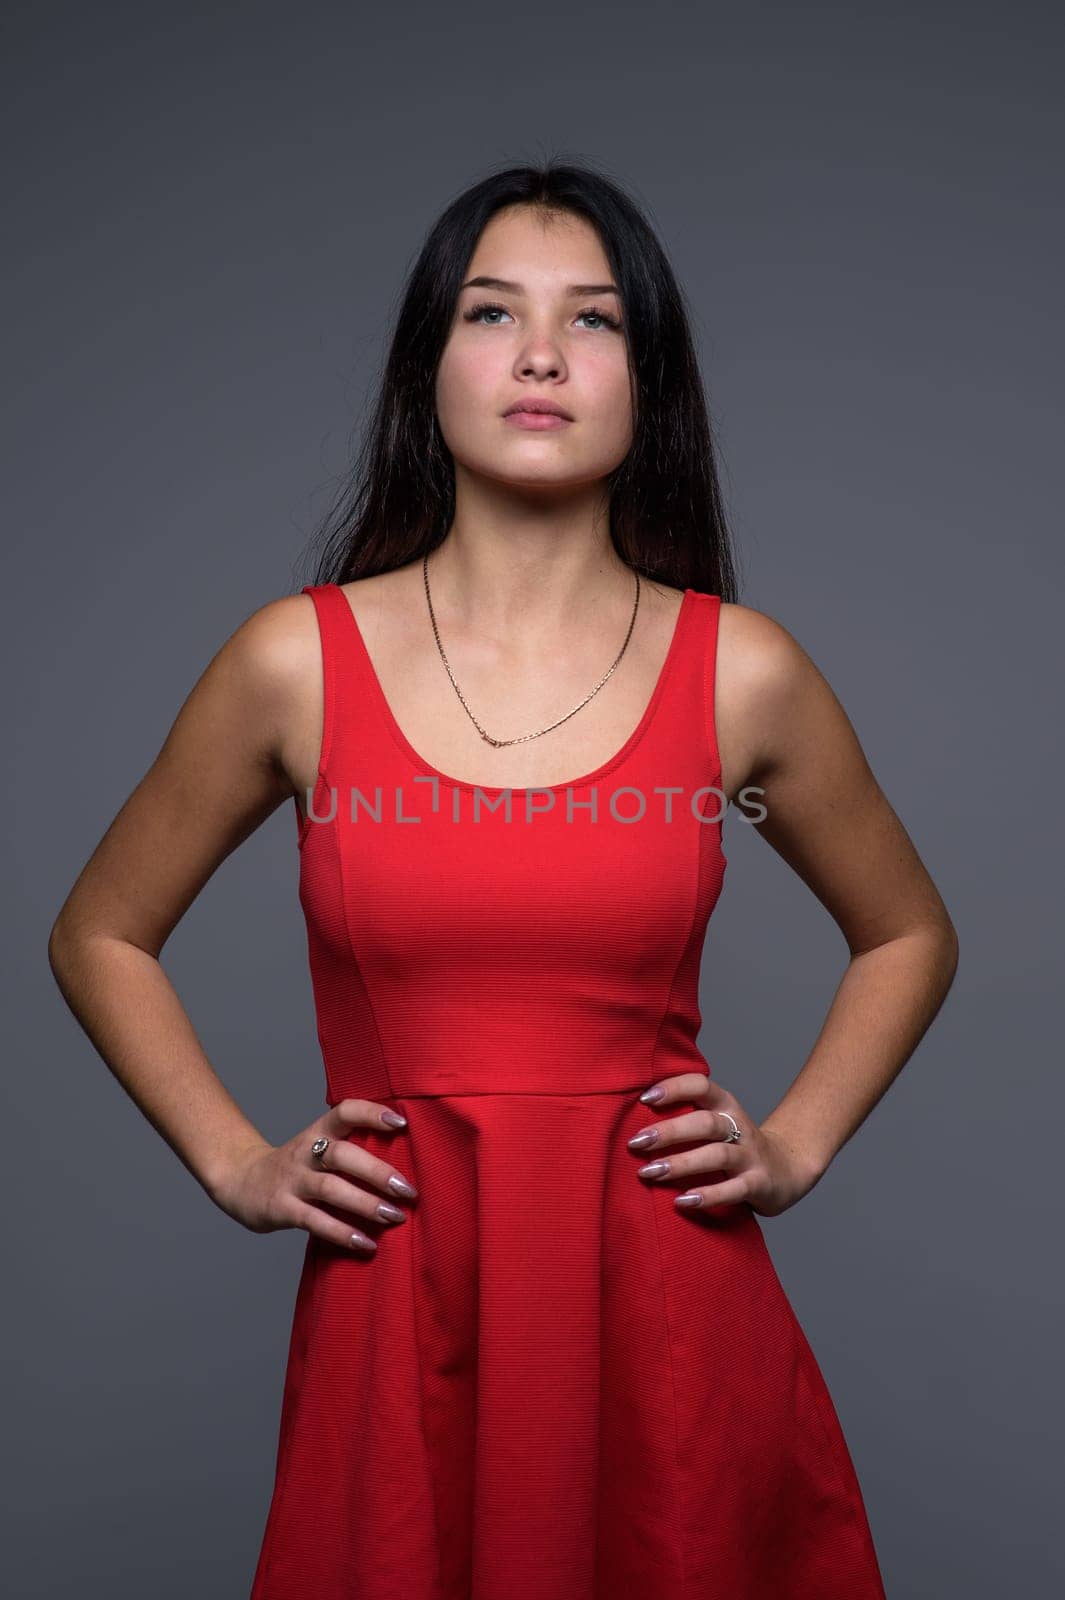 Studio portrait of a young beautiful girl in a red dress 3 by Mixa74